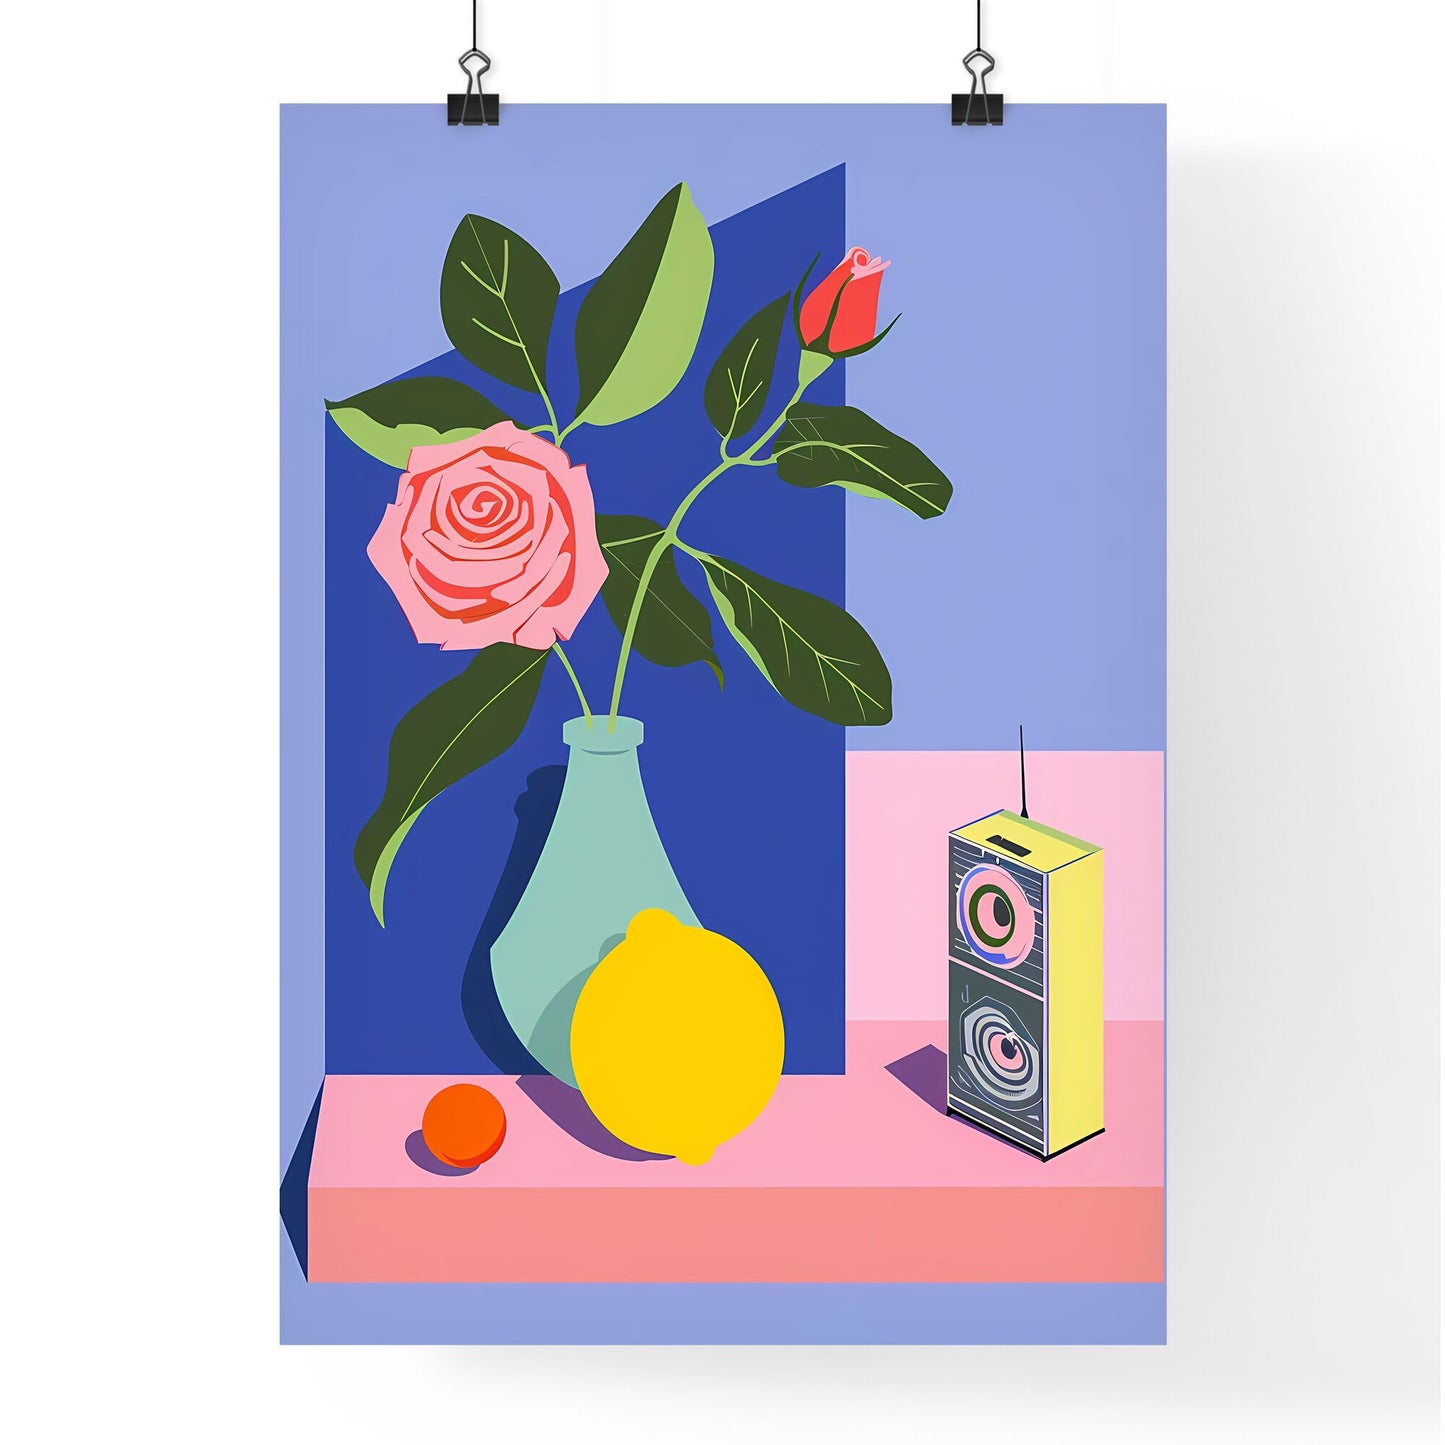 Indie risograph fine art print, lemon and rose still life, geometric shapes, blue background, pop art, minimal, defined outlines and shadowing Default Title